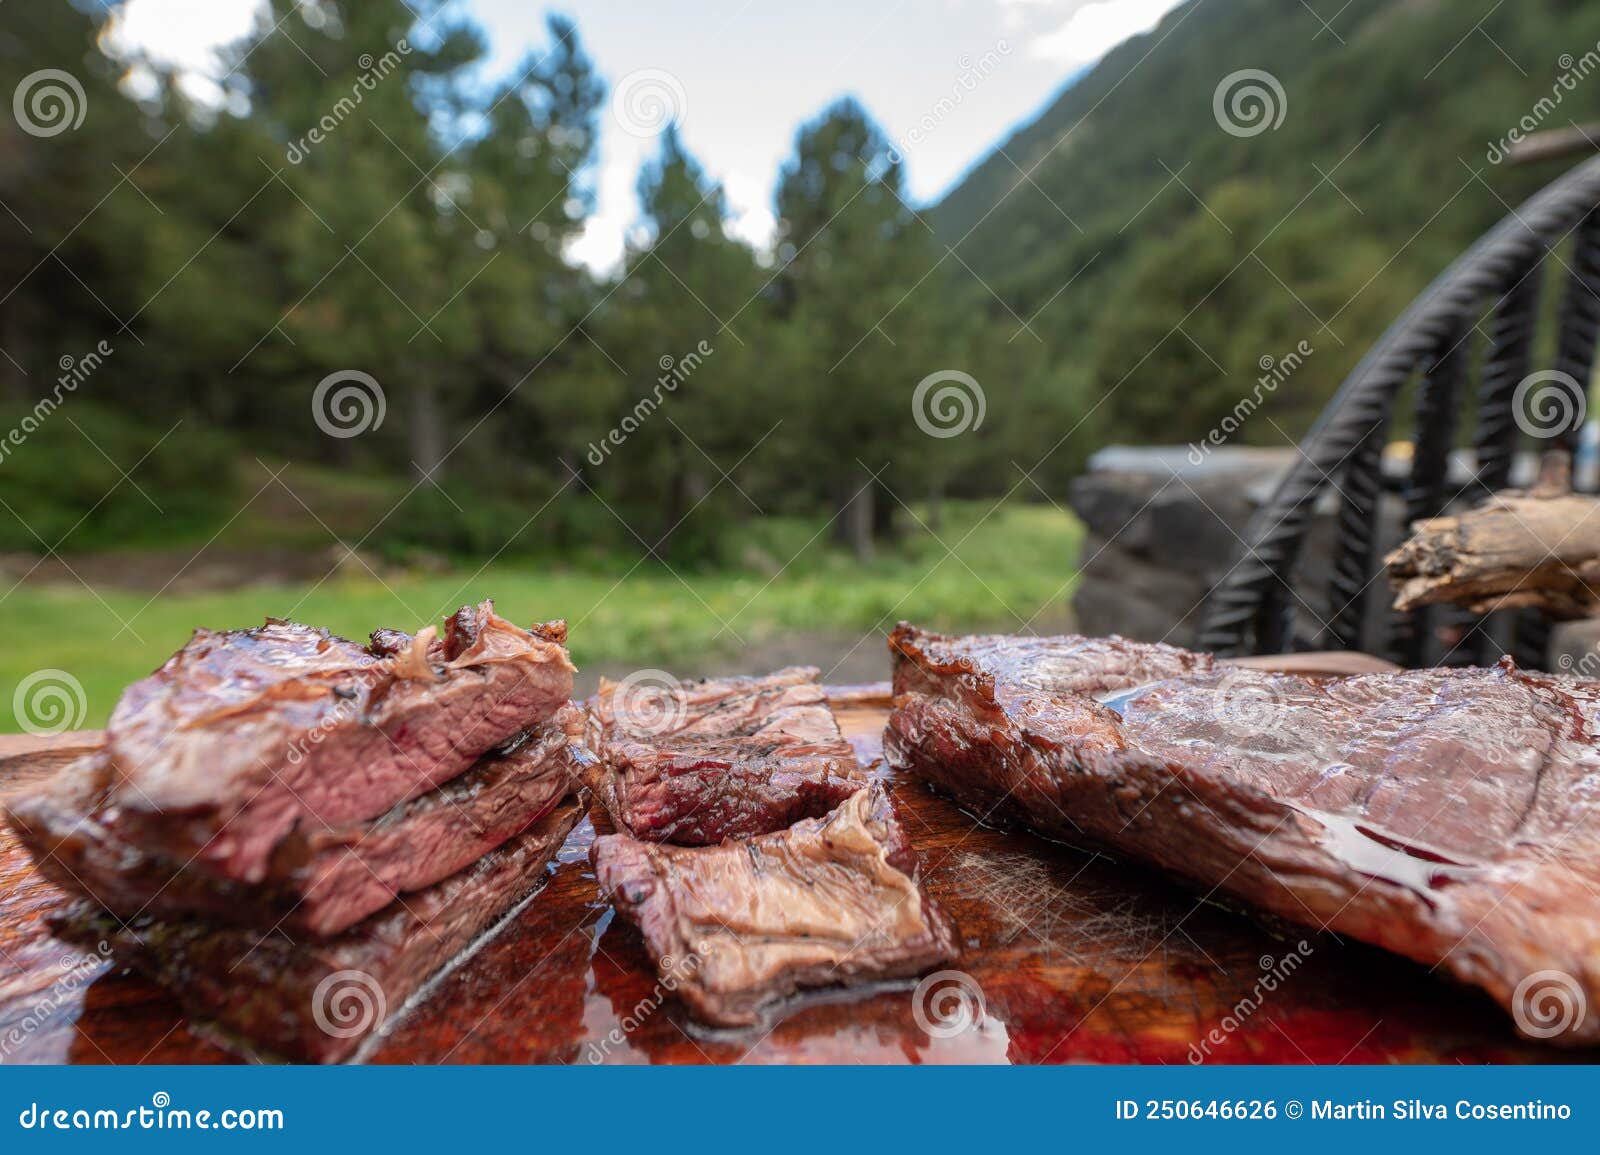 typical uruguayan and argentine asado cooked on fire. entrana and vacio meat cuts. accompanied with chorizo